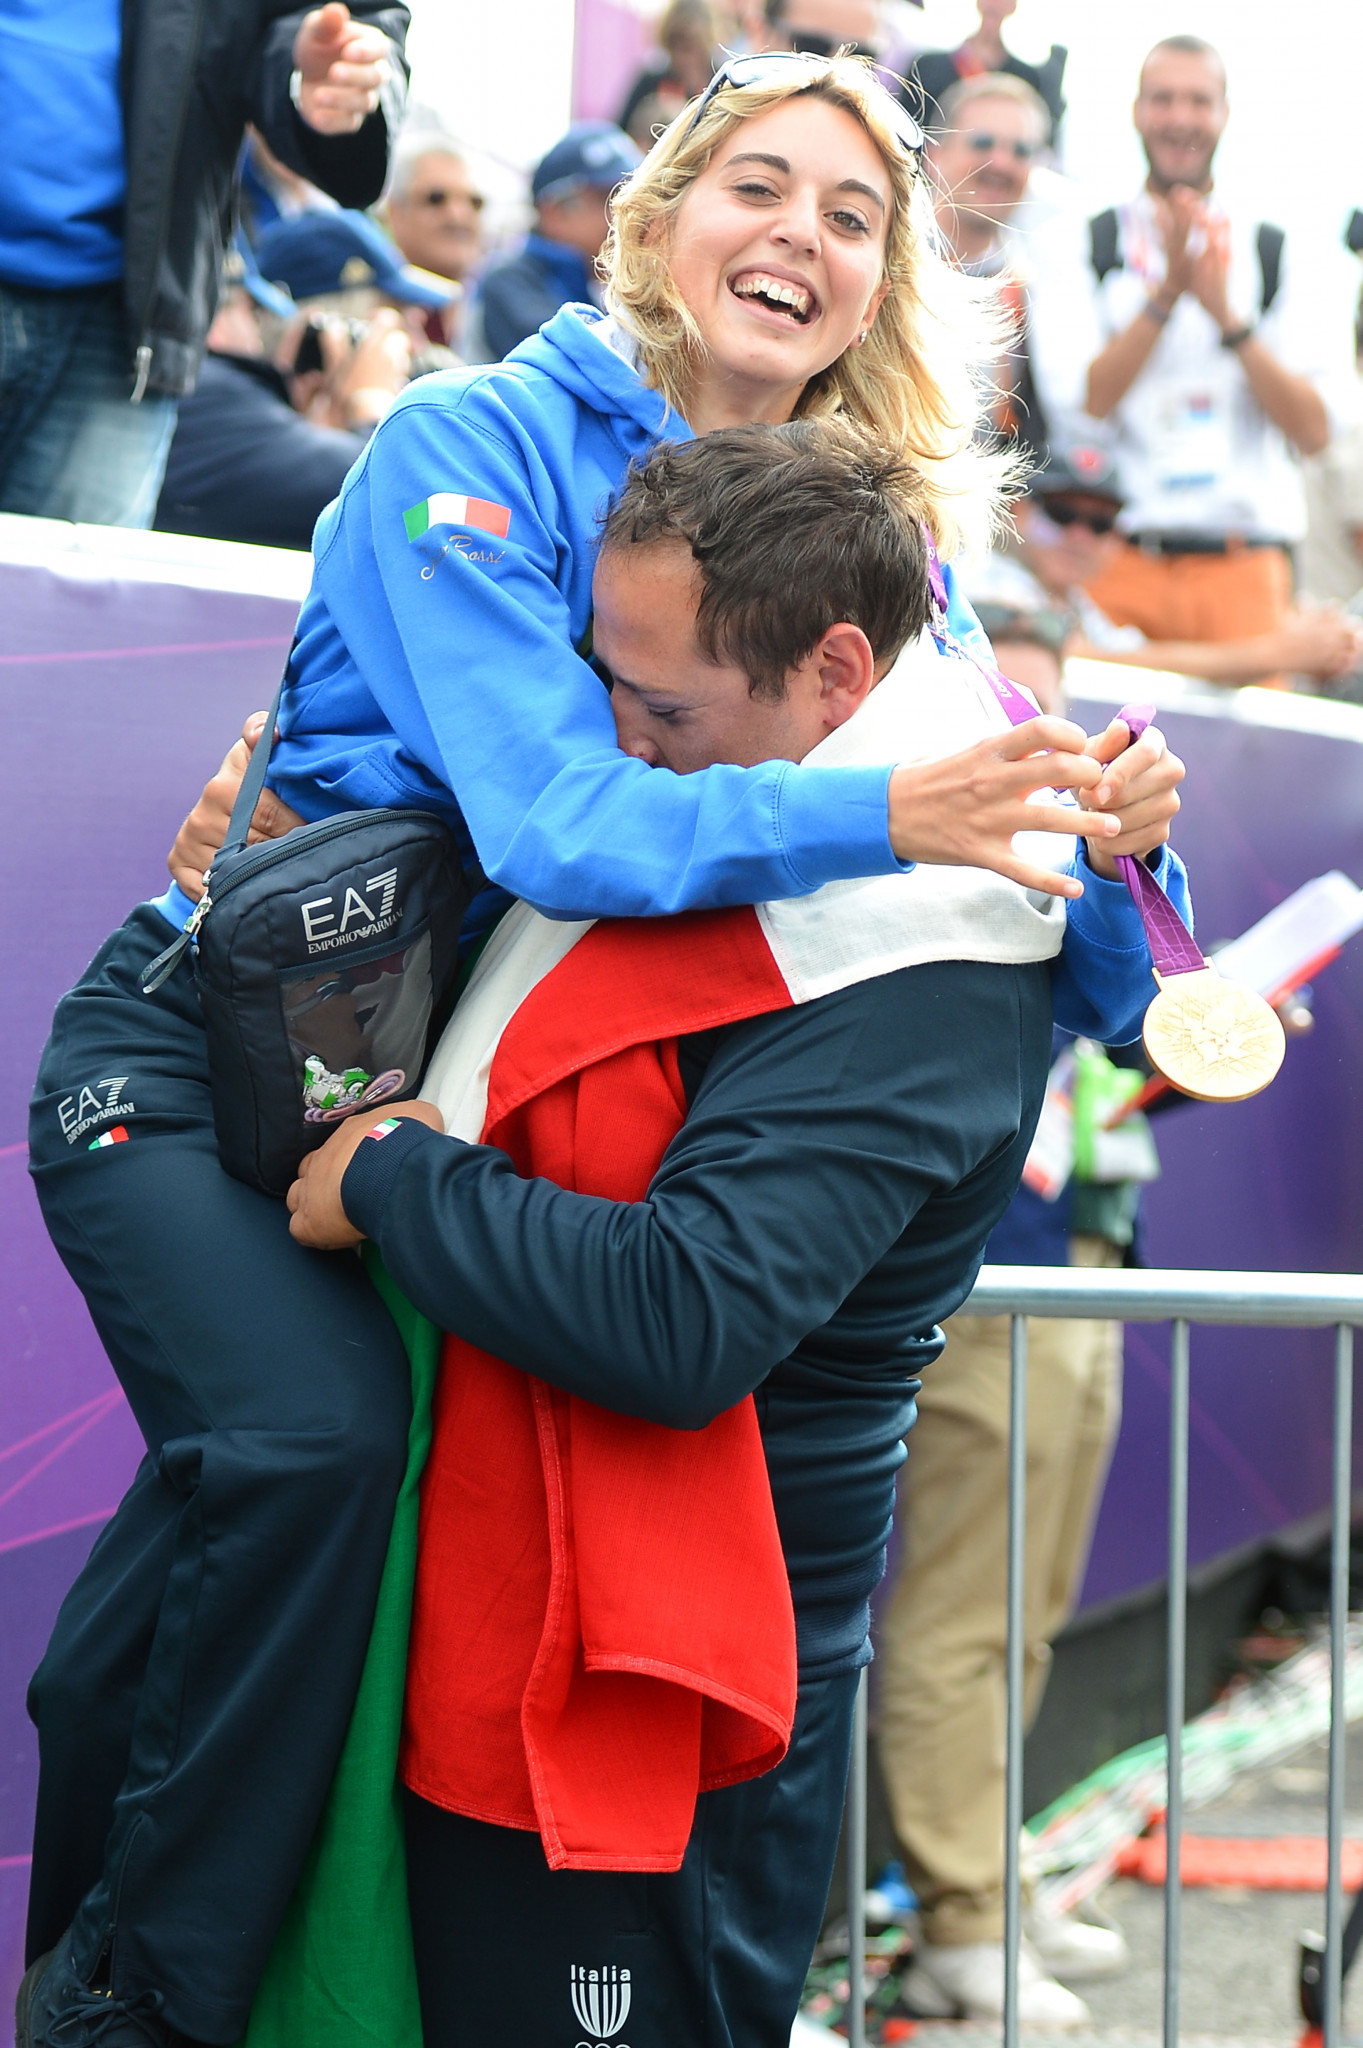 Italy's Jessica Rossi, pictured celebrating victory at London 2012, is well placed ahead of tomorrow's women's trap final in the ISSF Shotgun World Cup in the United Arab Emirates ©Getty Images